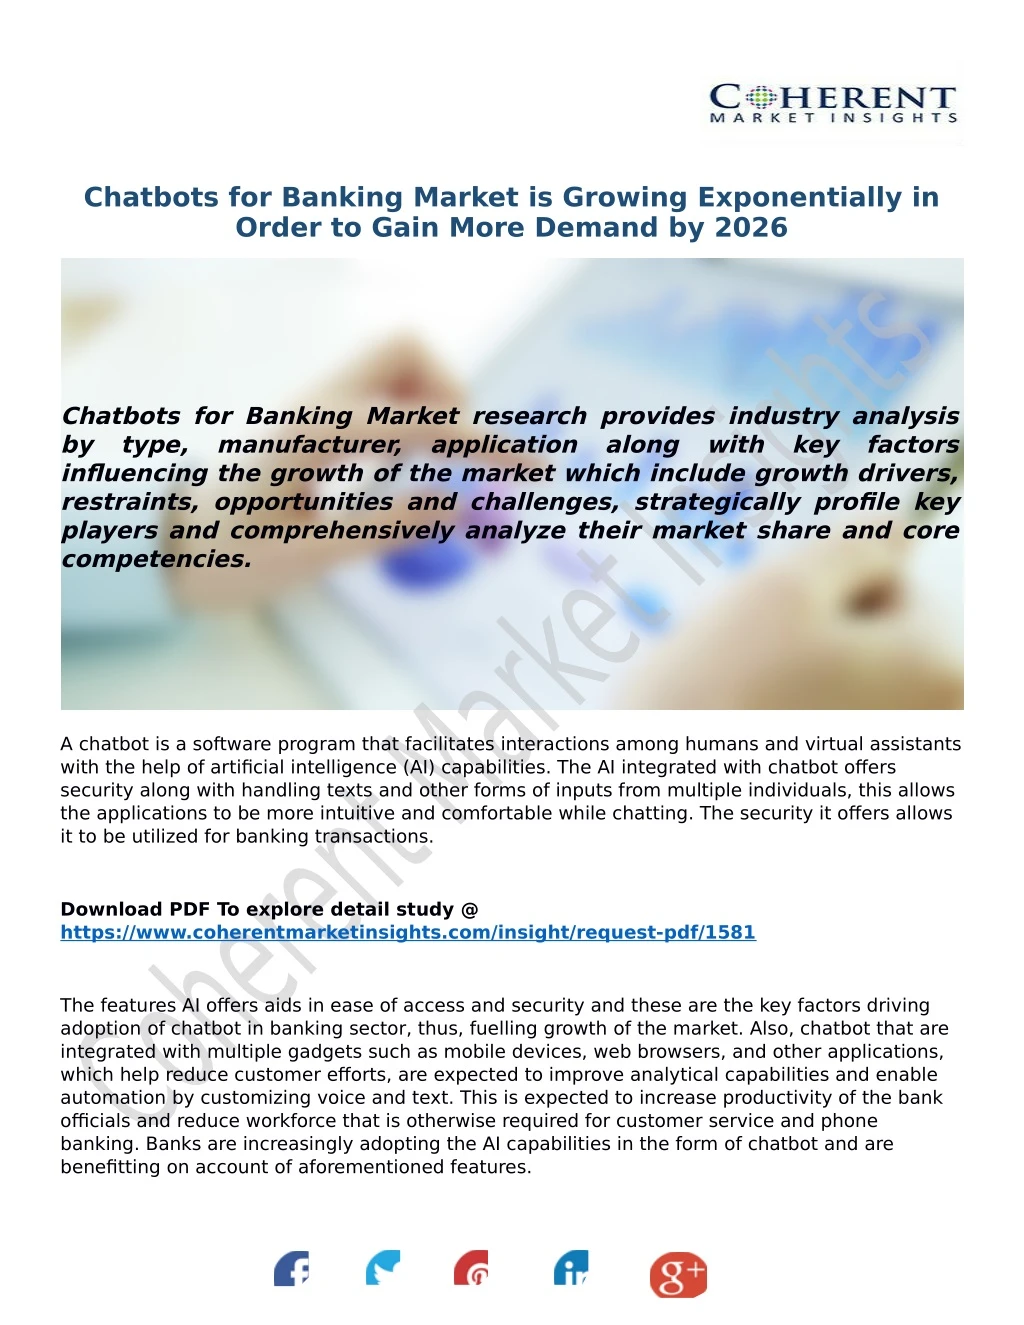 chatbots for banking market is growing